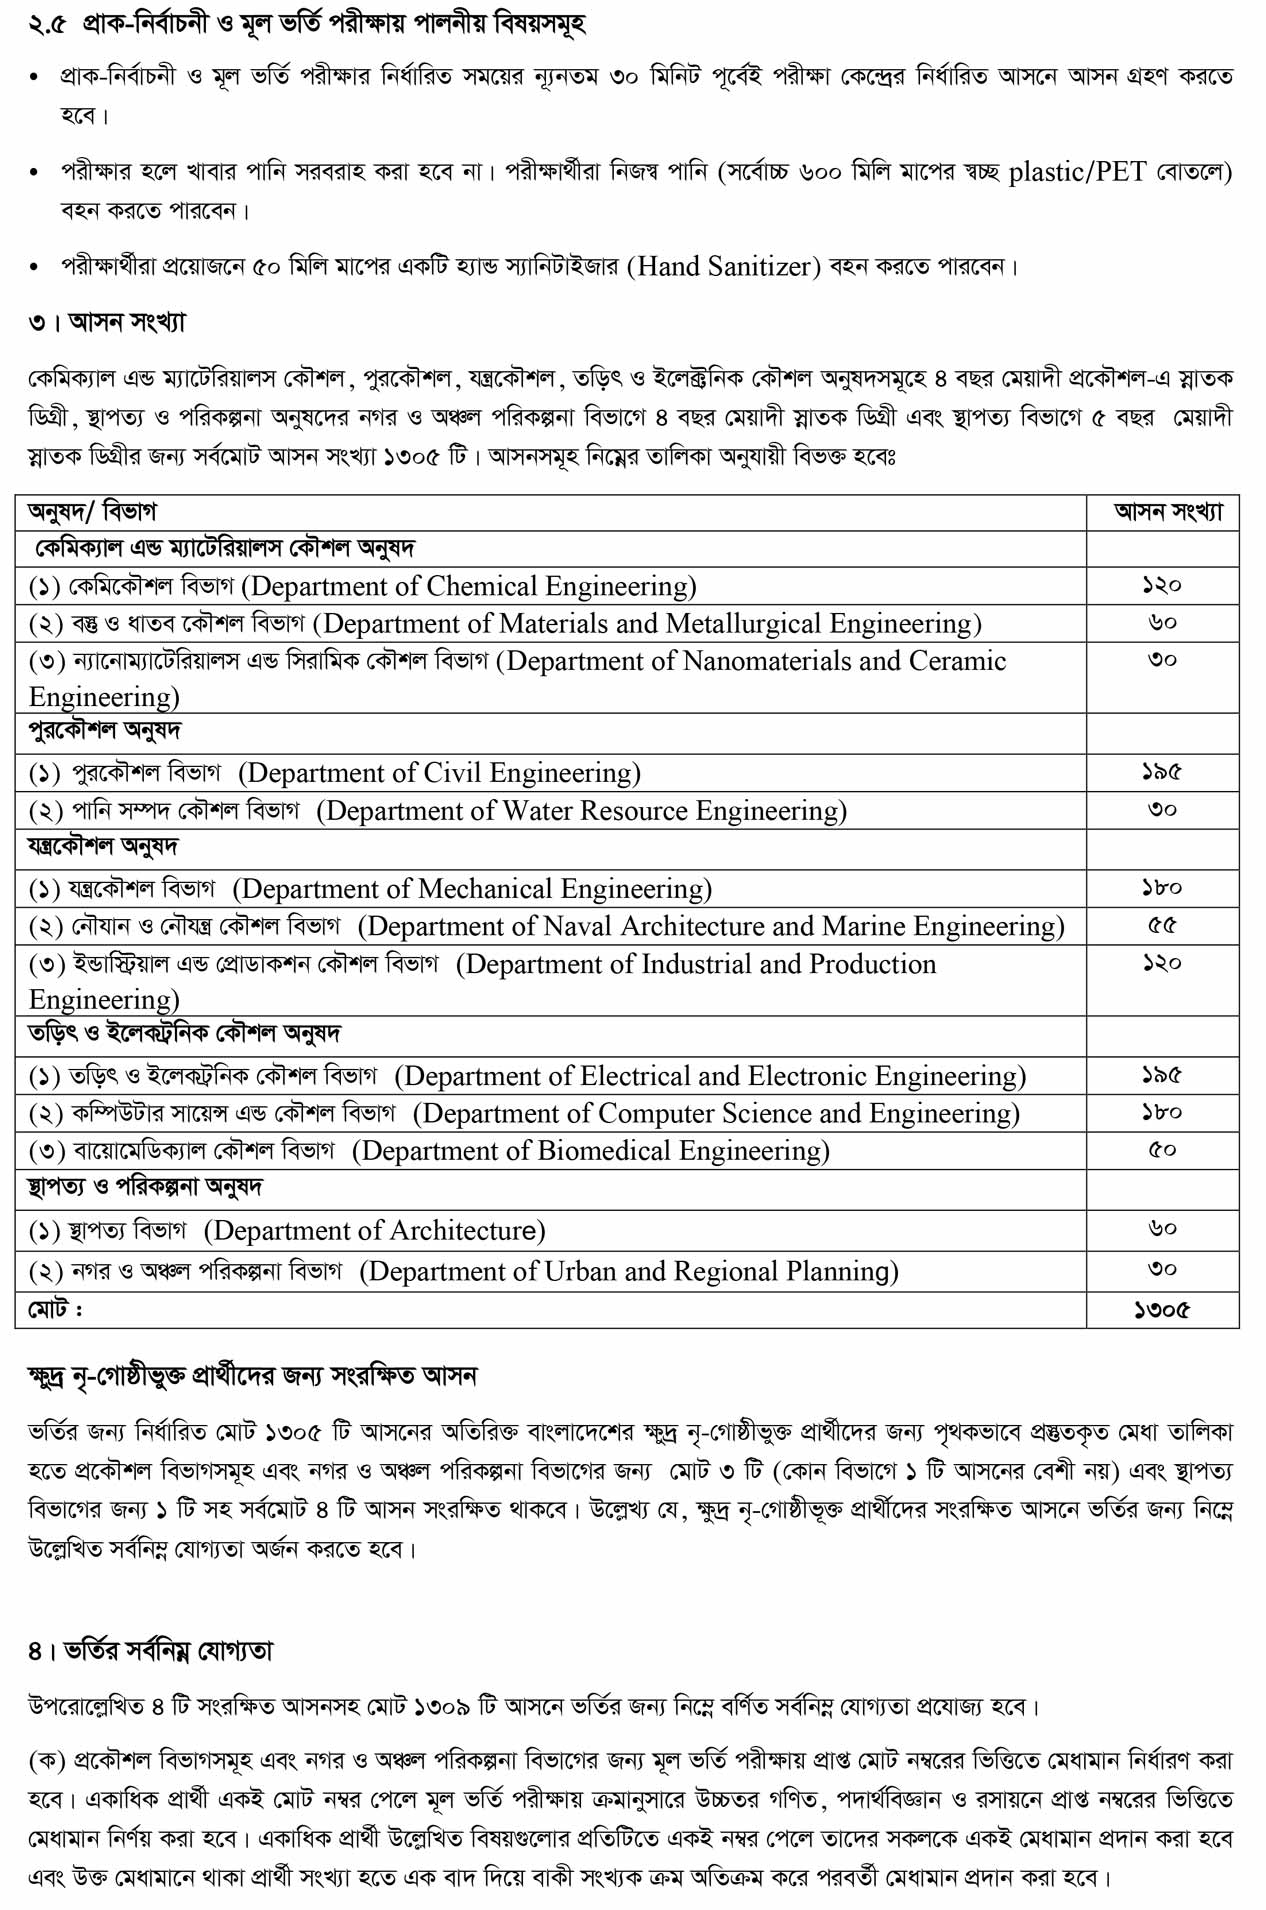 BUET Admission Apply Now